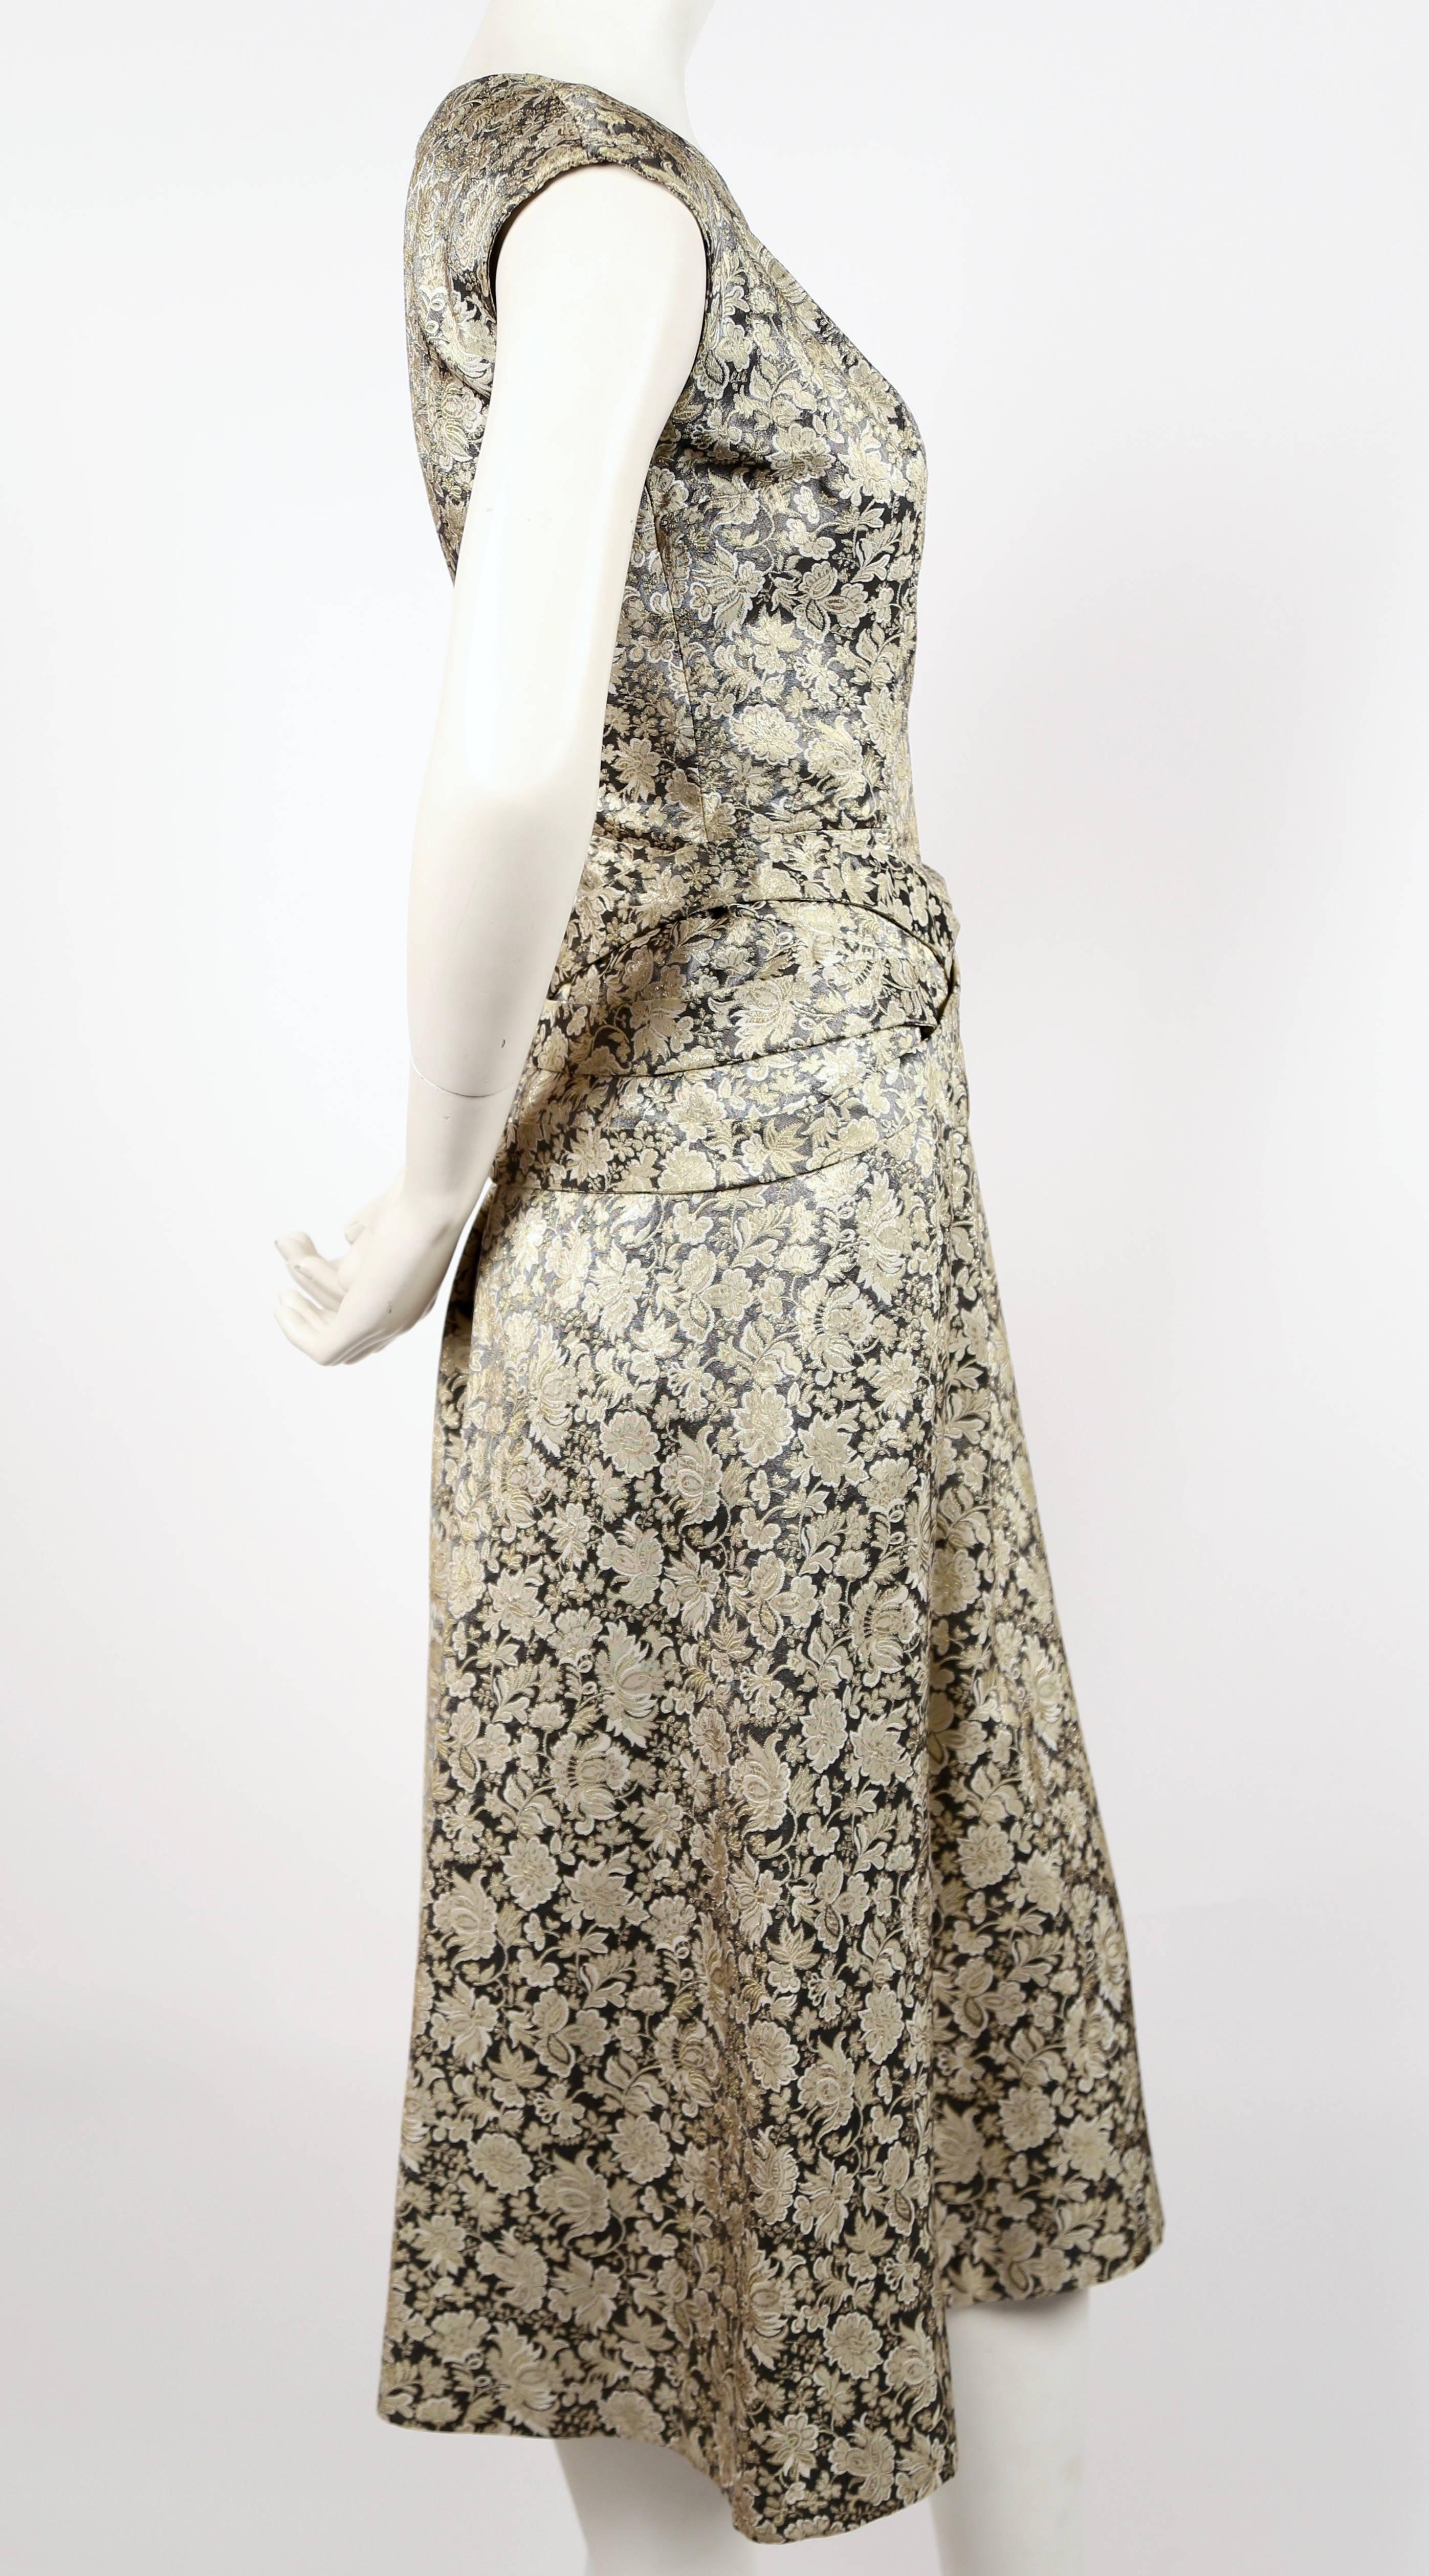 Very rare silver metallic brocade haute couture dress with cross tie detail at waist designed by Antonio Castillo for Jeanne Lanvin dating to the 1950's. Dress best fits a US 6 to 8. Approximate measurements: bust 35, waist 29